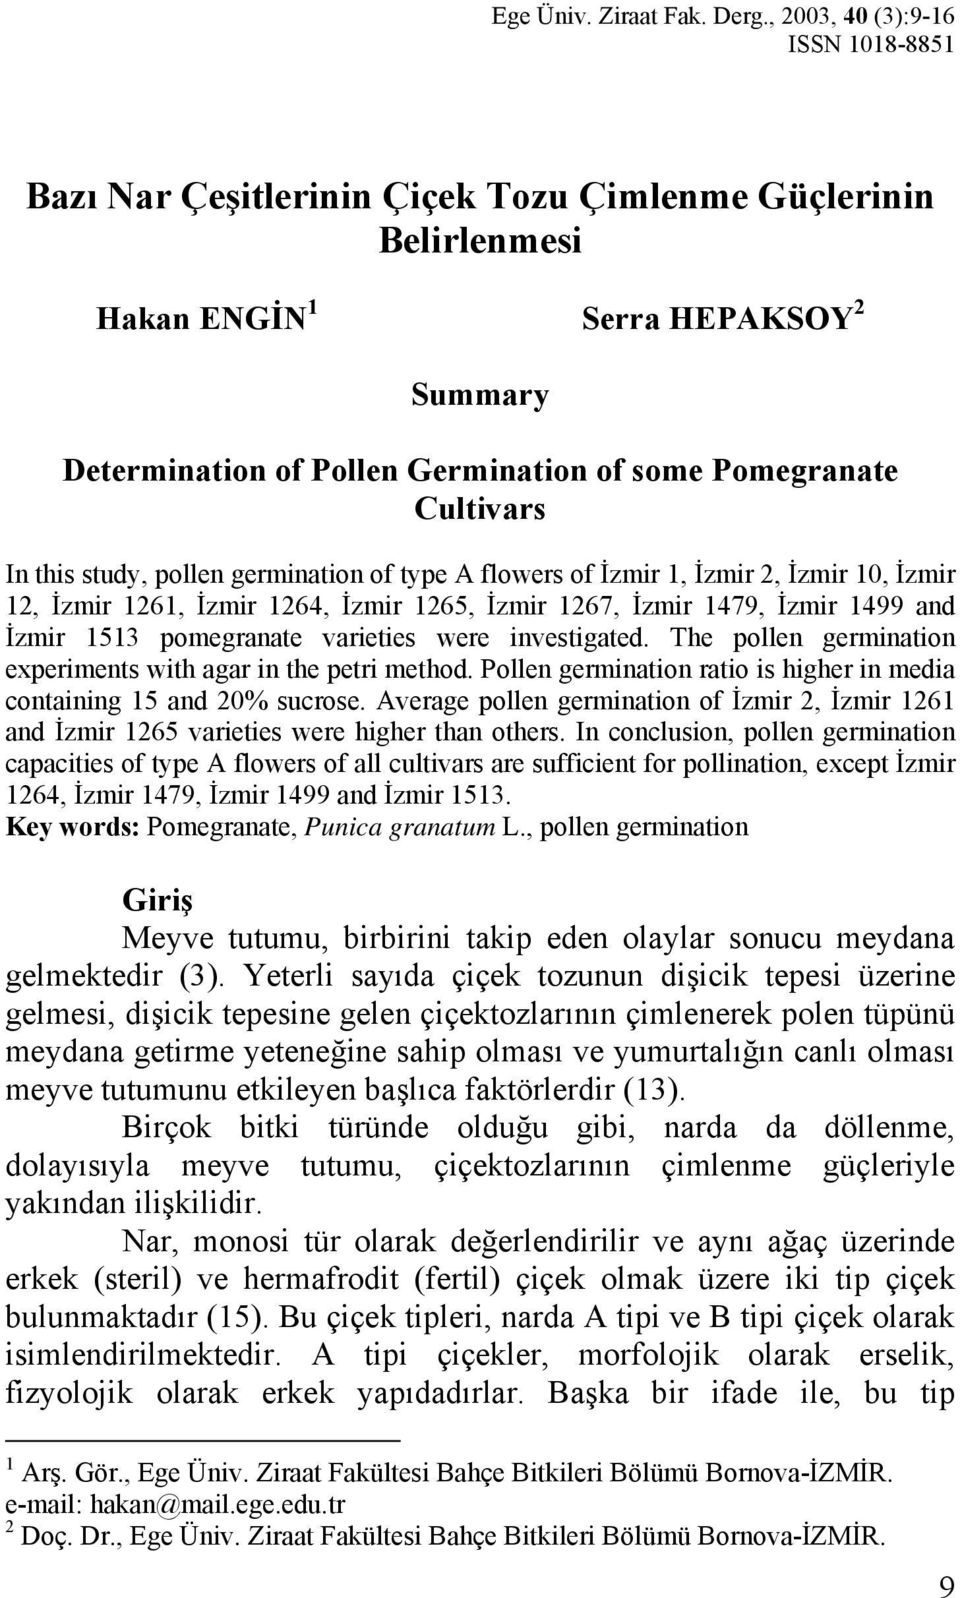 Cultivars In this study, pollen germination of type A flowers of İzmir 1, İzmir 2, İzmir 10, İzmir 12, İzmir 1261, İzmir 1264, İzmir 1265, İzmir 1267, İzmir 1479, İzmir 1499 and İzmir 1513